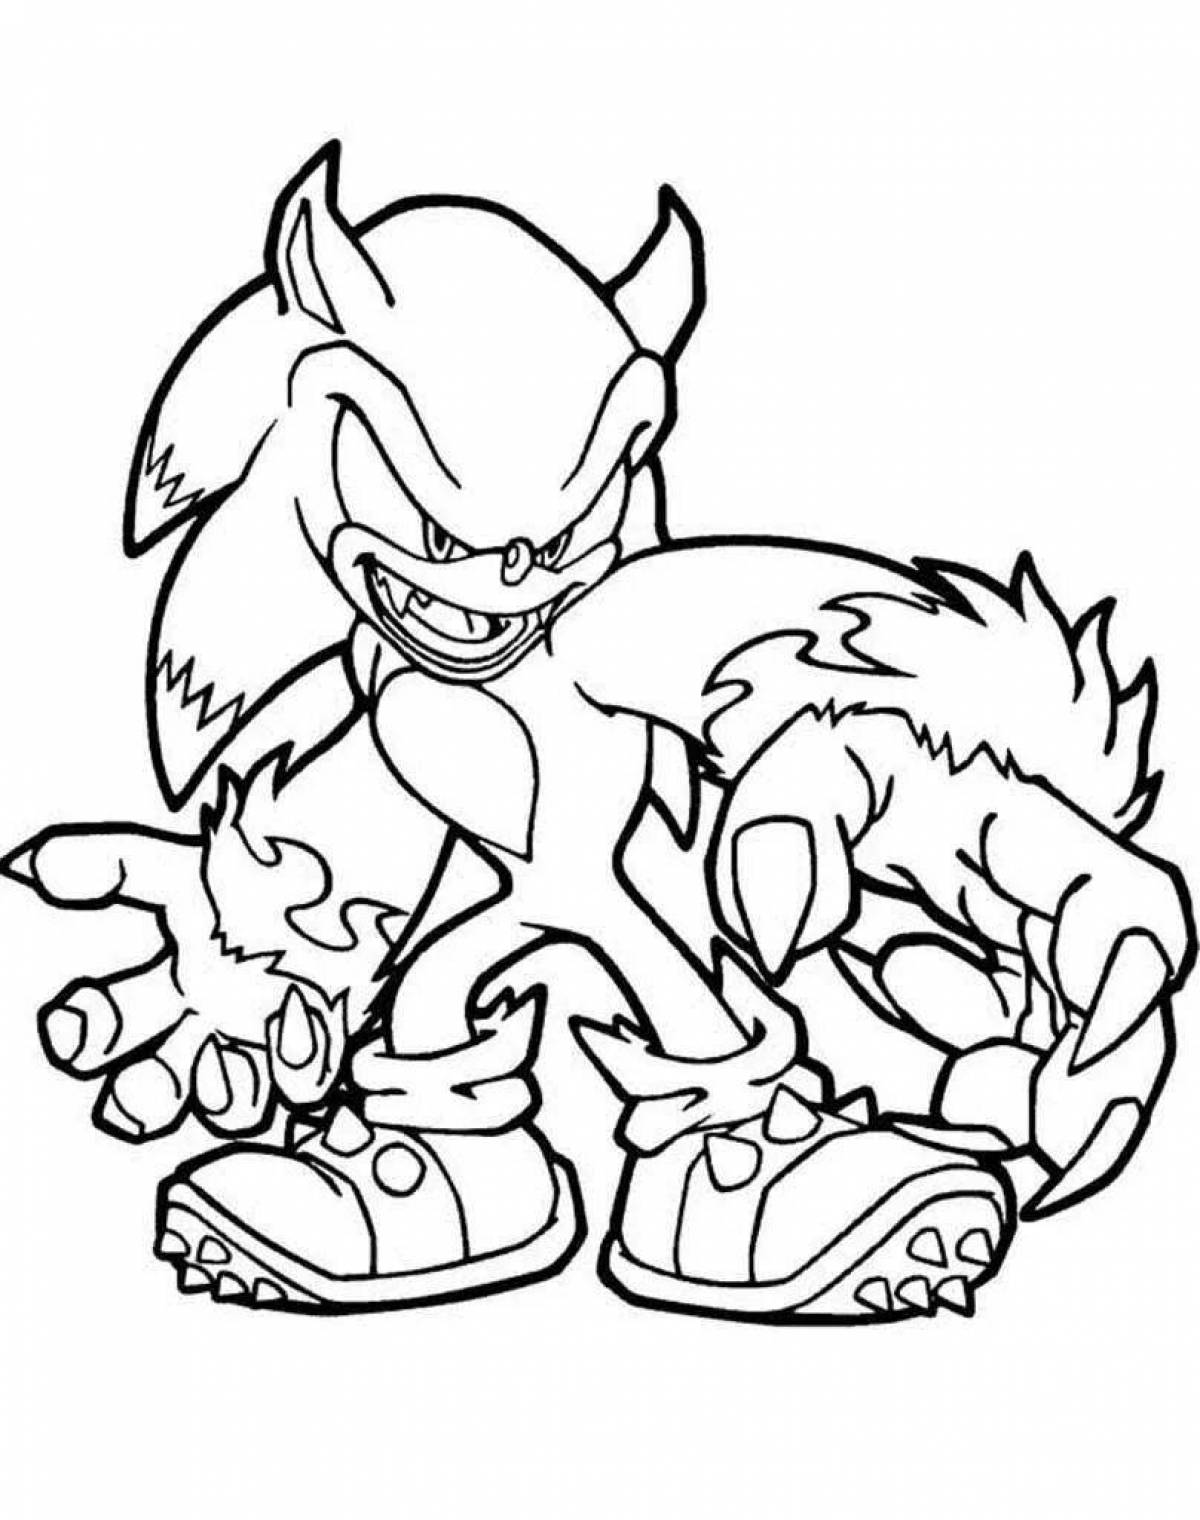 Coloring book evil sonic - disgusting